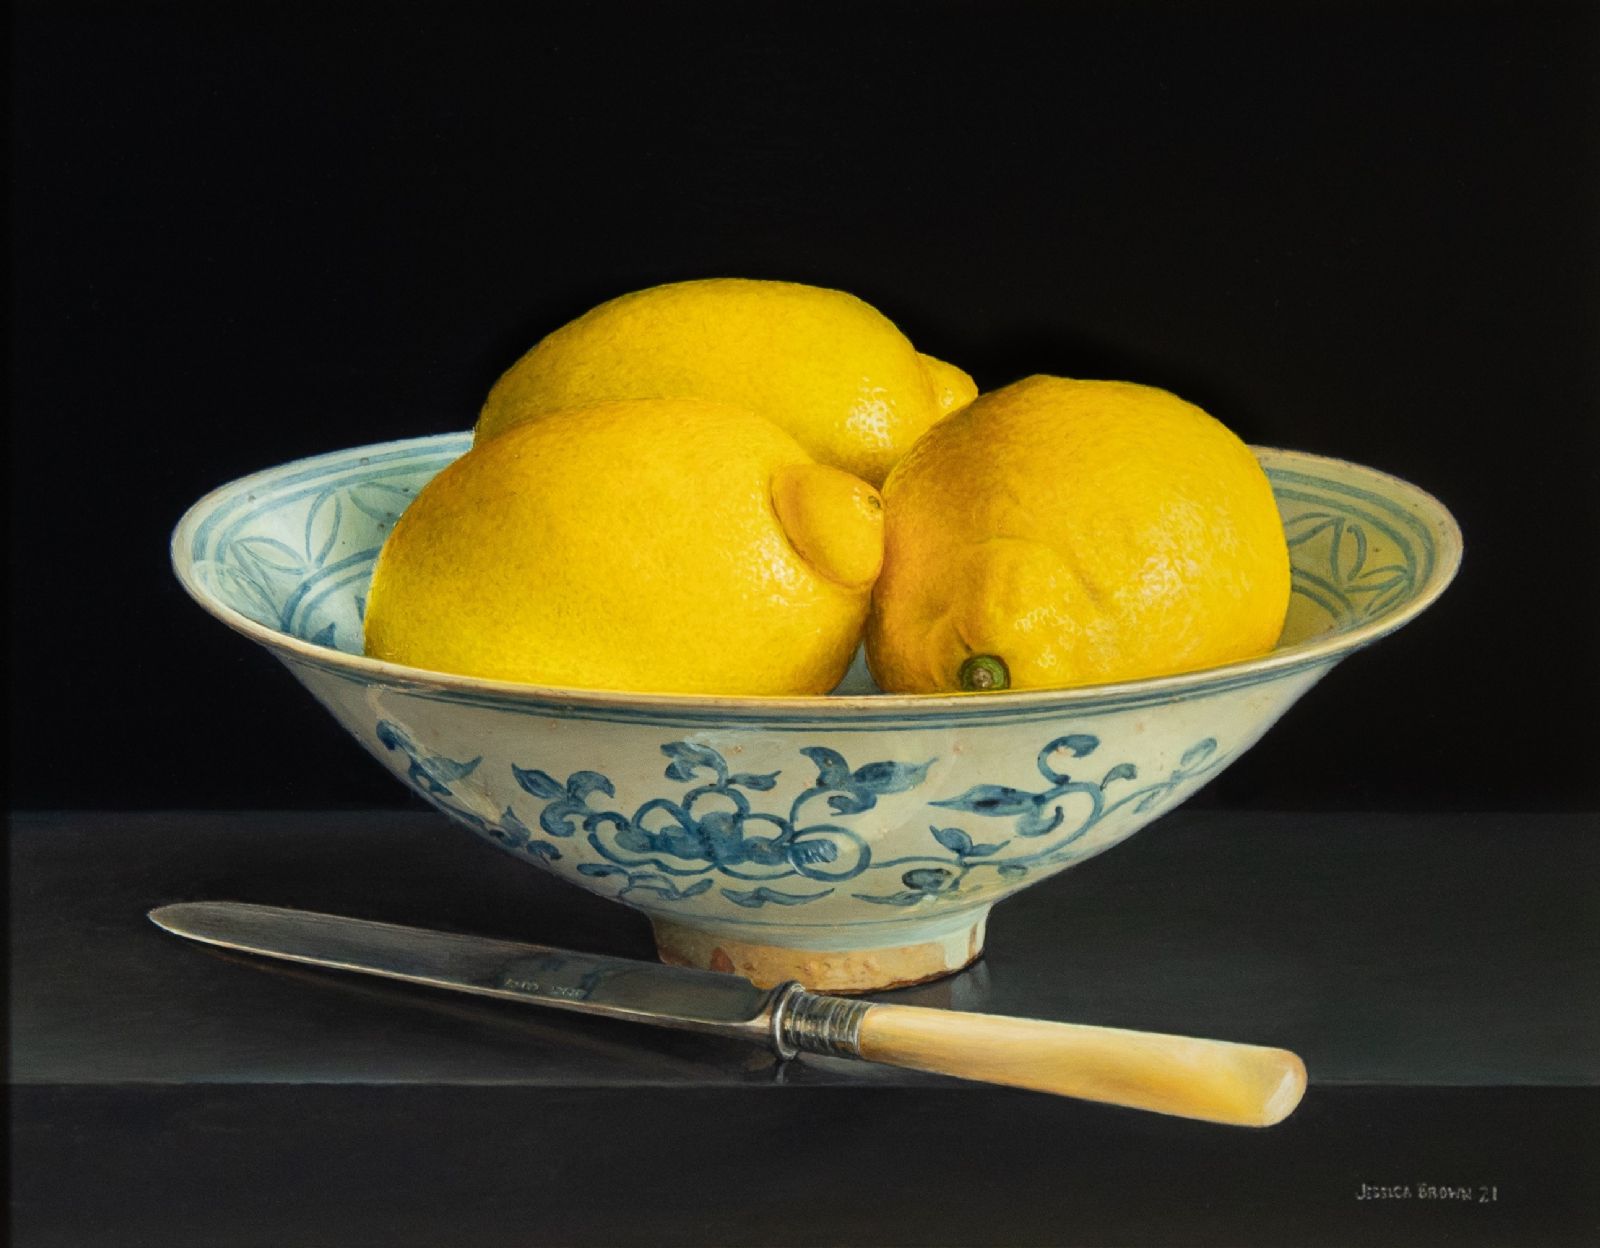 Jessica Brown - Still Life with Three Lemons in a Chinese Bowl and Fruit Knife 